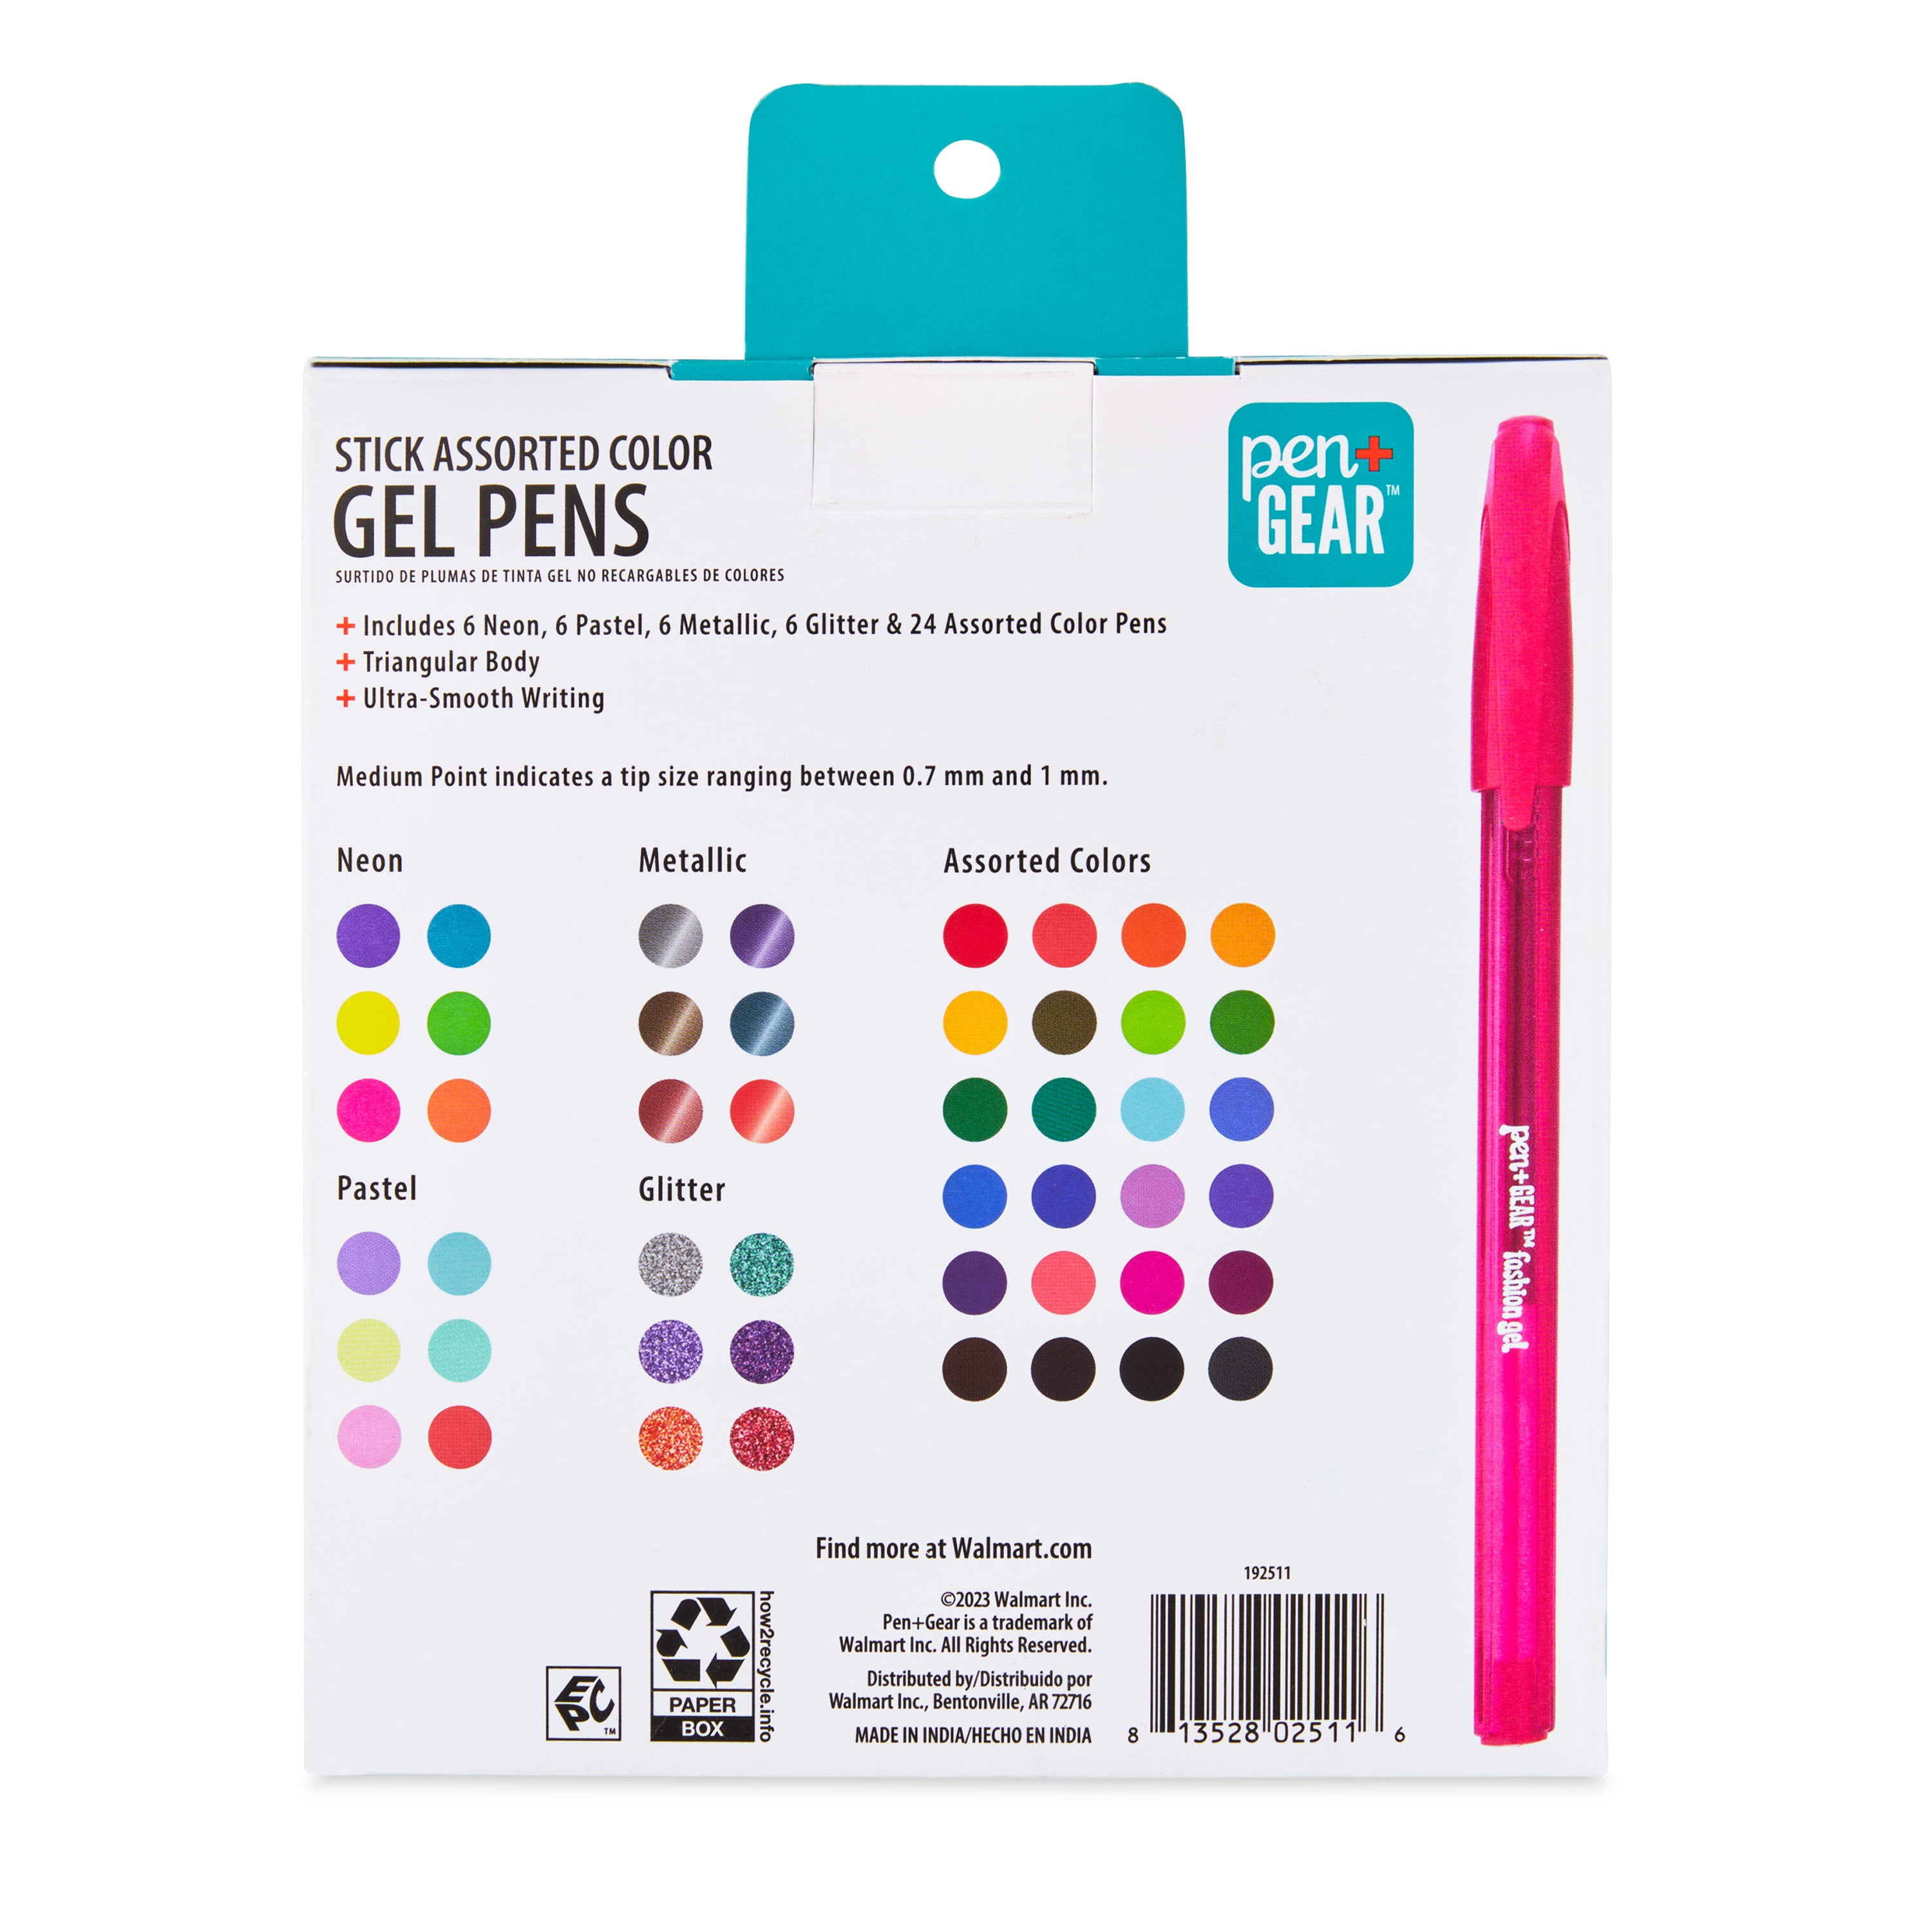 Zen Pen Army Deluxe Vibes Journaling Exclusive 29 Piece Set, Includes 17 Bright and Metallic Gel Pens, 10 Double Ended Highlighters, and 2 G-301